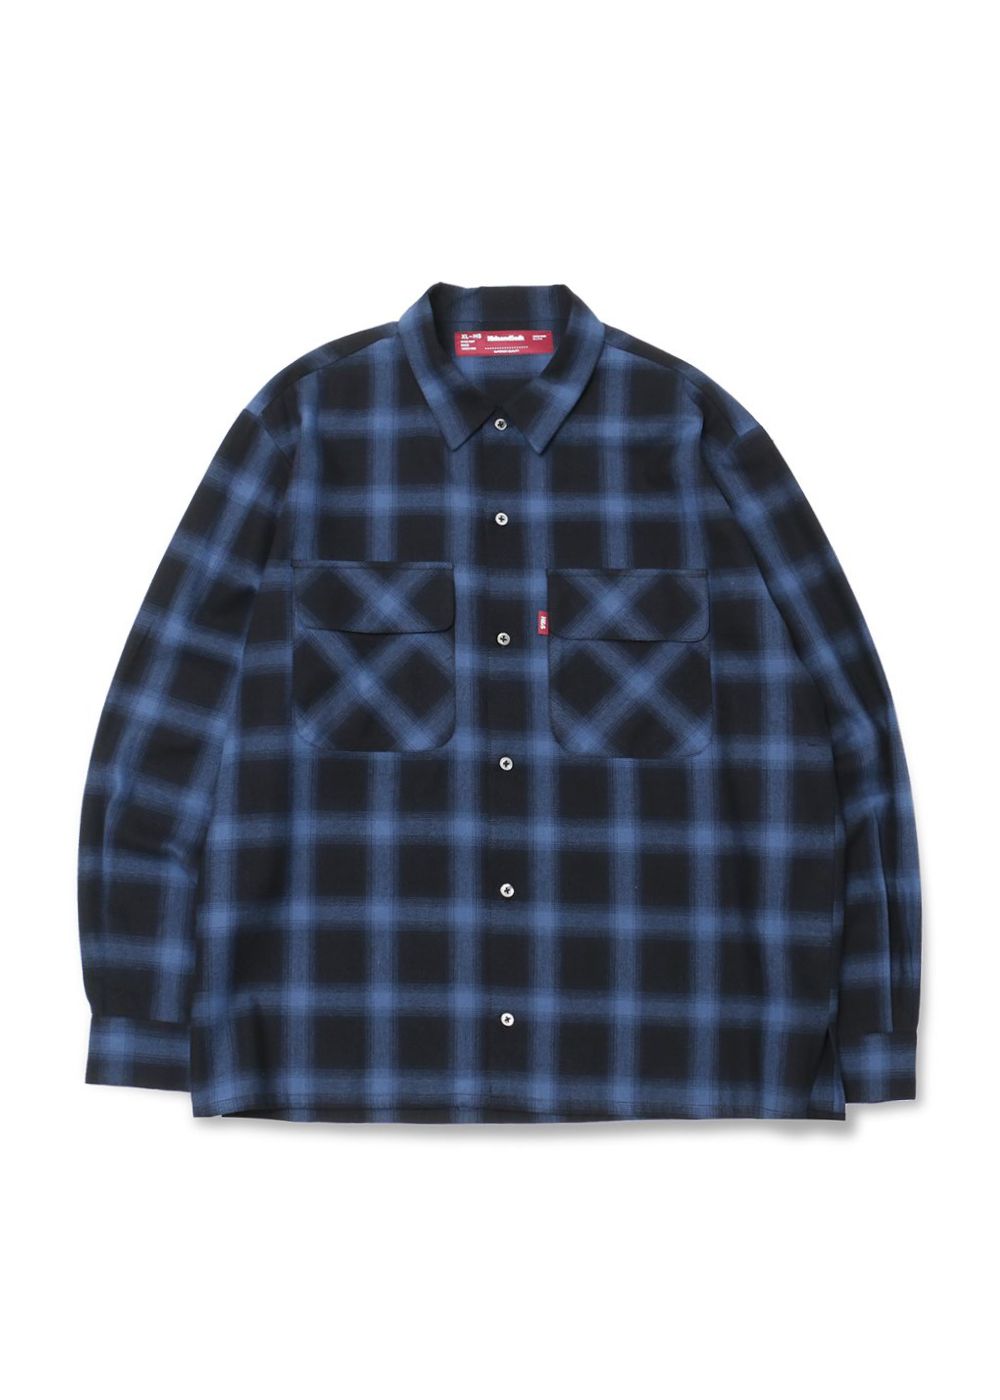 HIDE AND SEEK - OMBRE CHECK L/S SHIRT (BLUE) / オンブレ